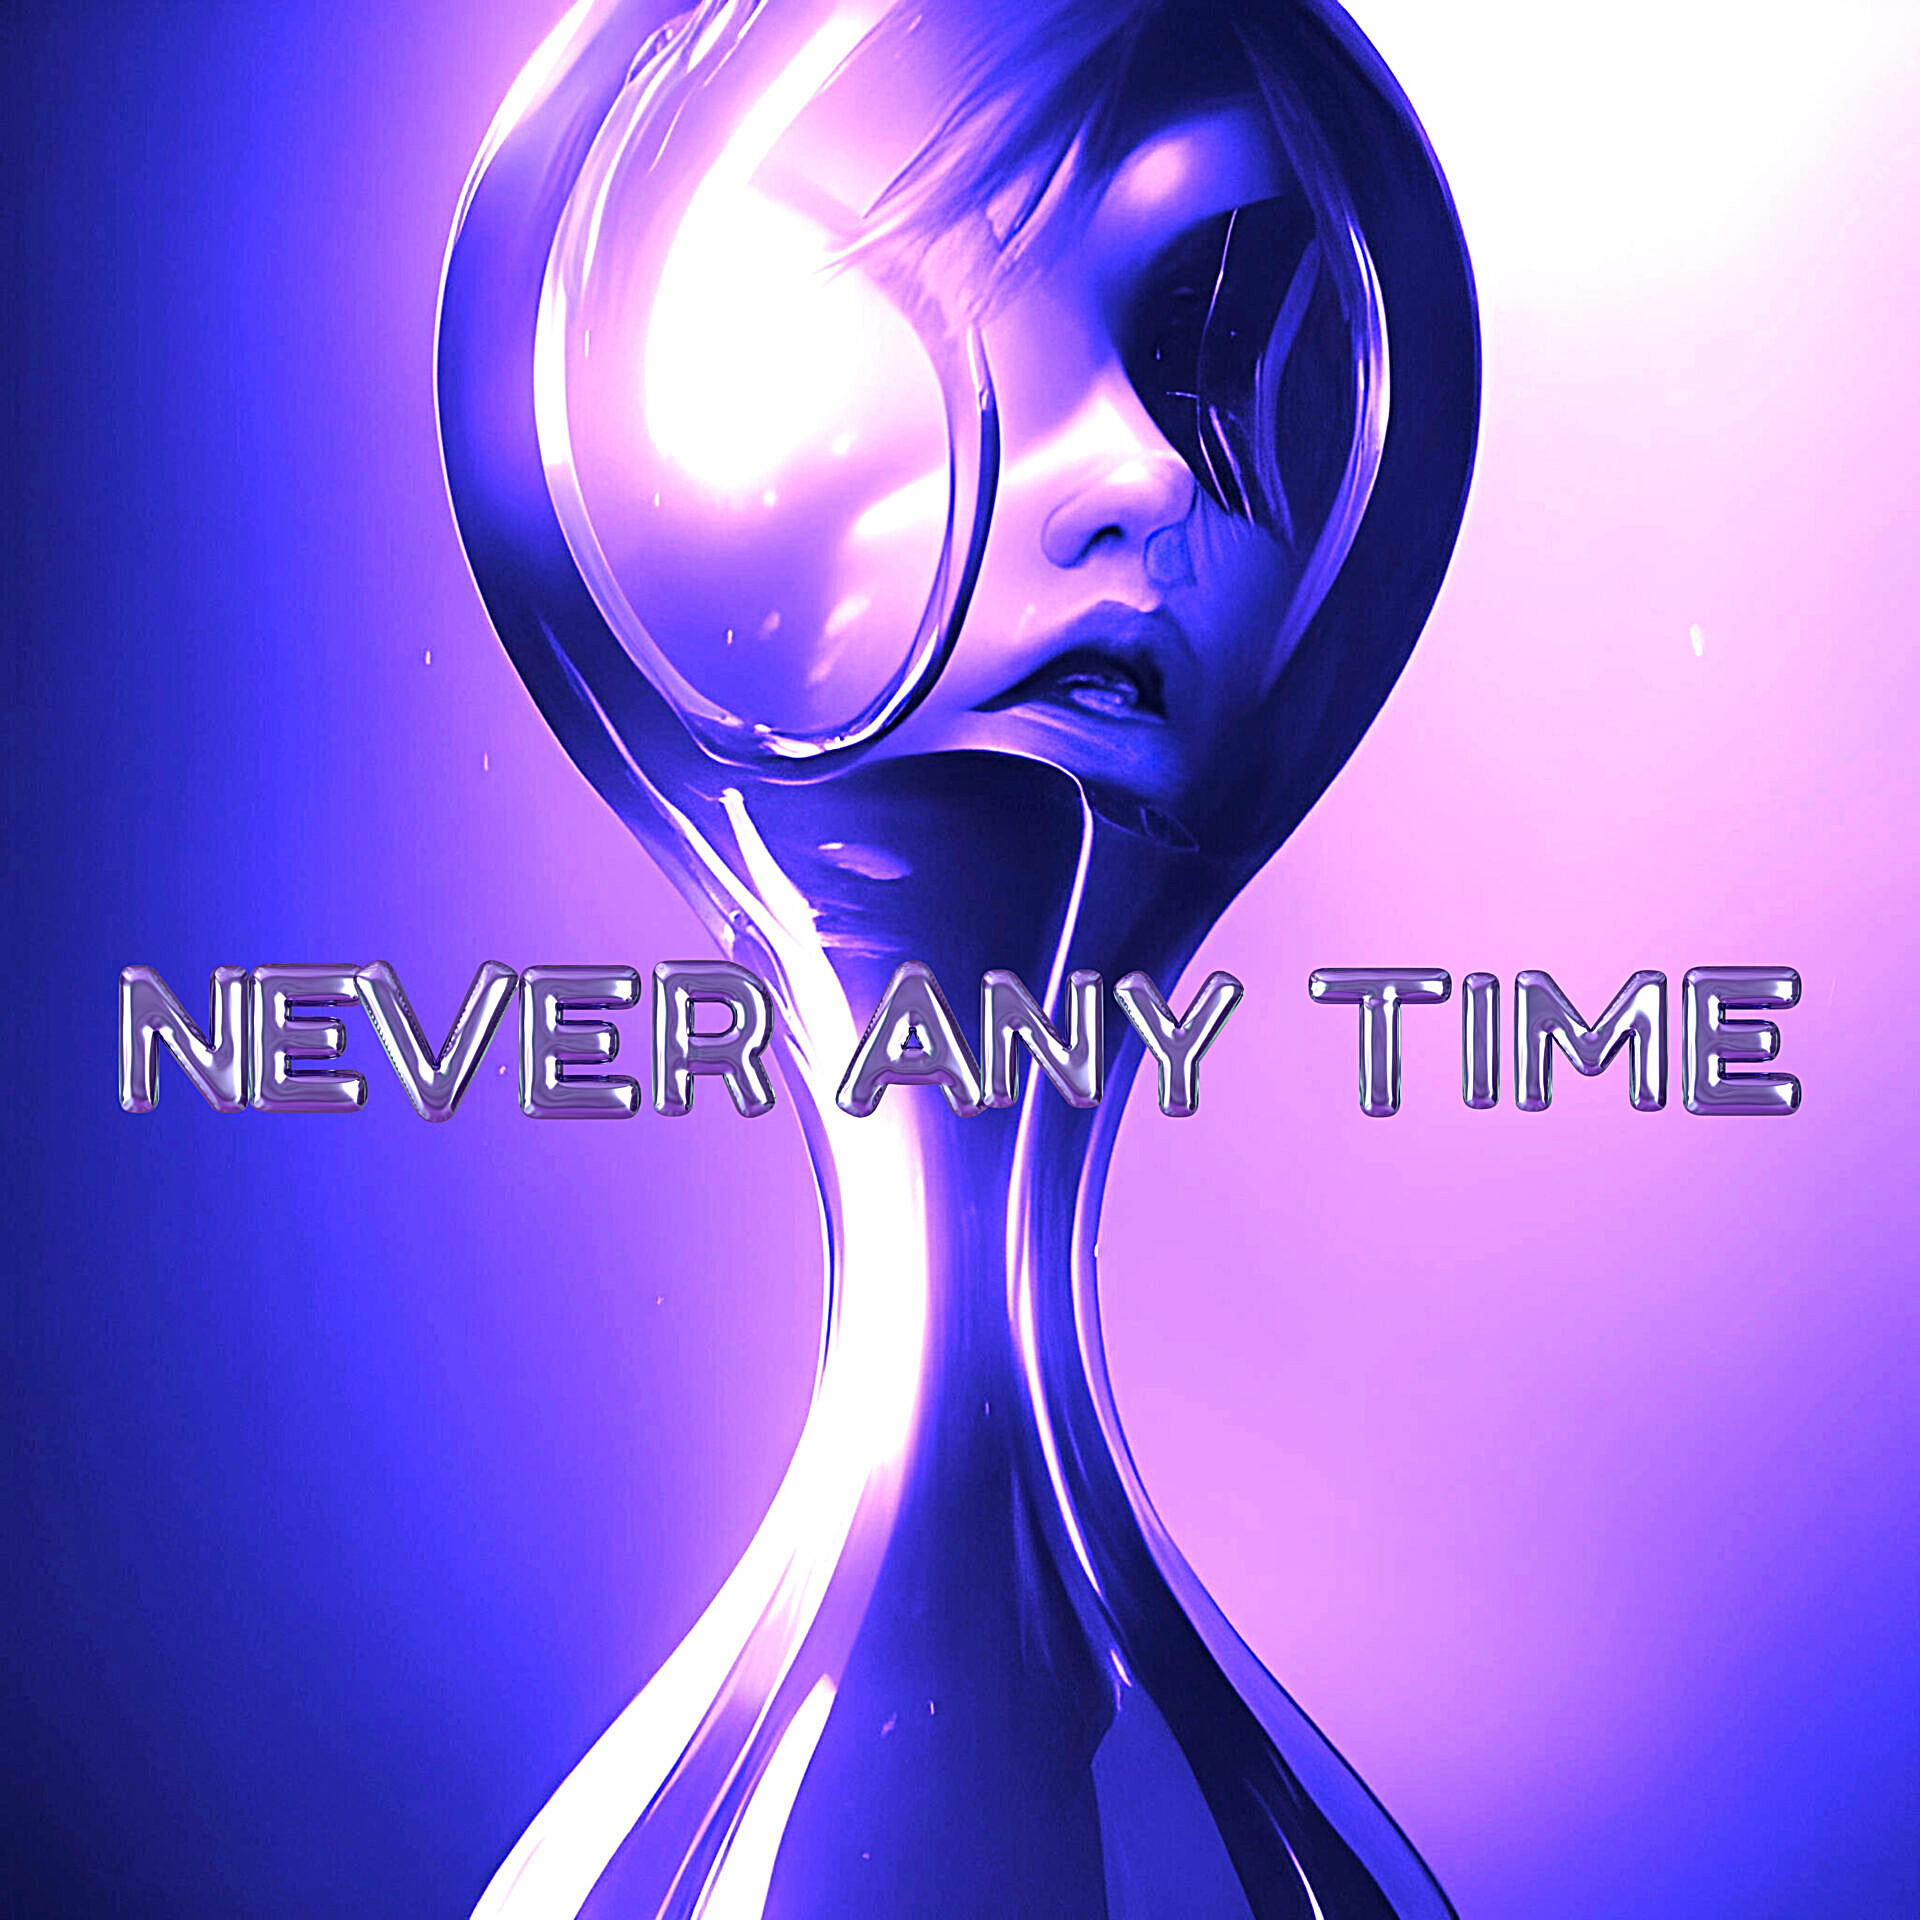 Louie Drambouie - Never Any Time Article Image - SONO Music Press Release